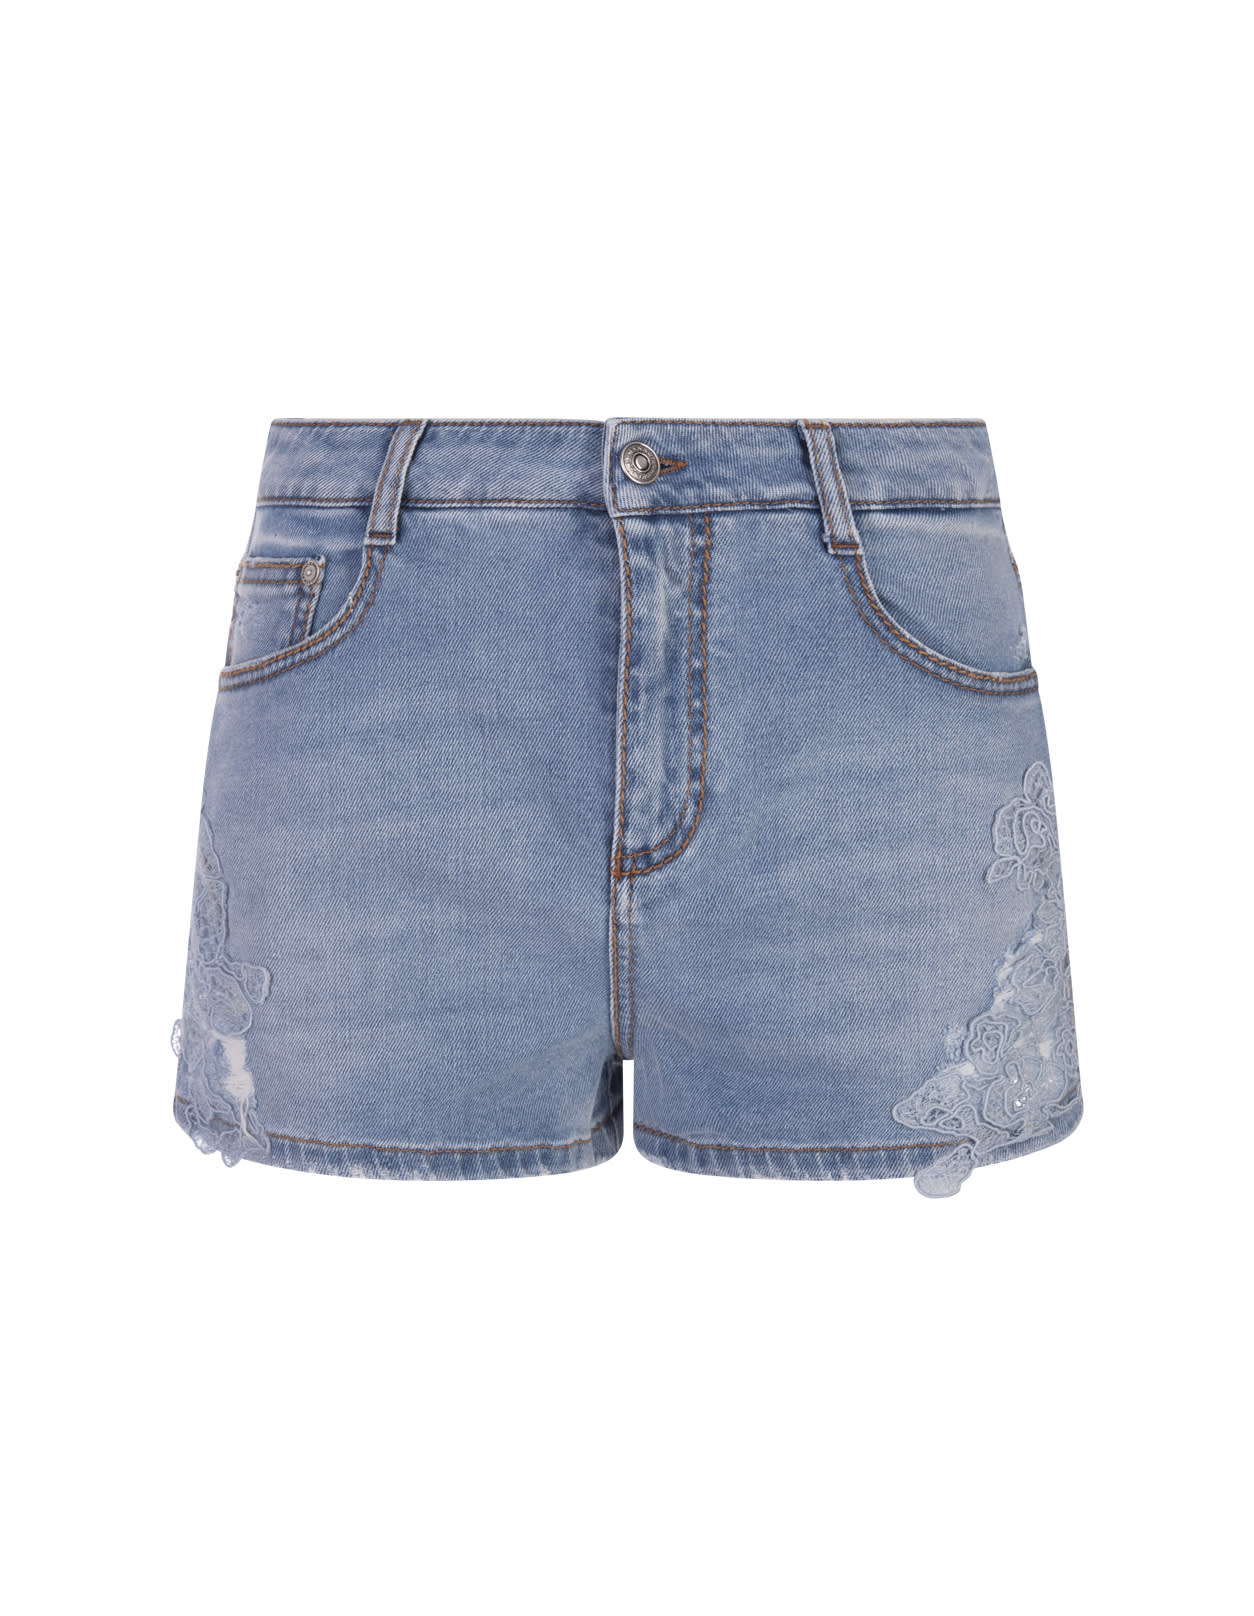 Blue Denim Shorts With Lace